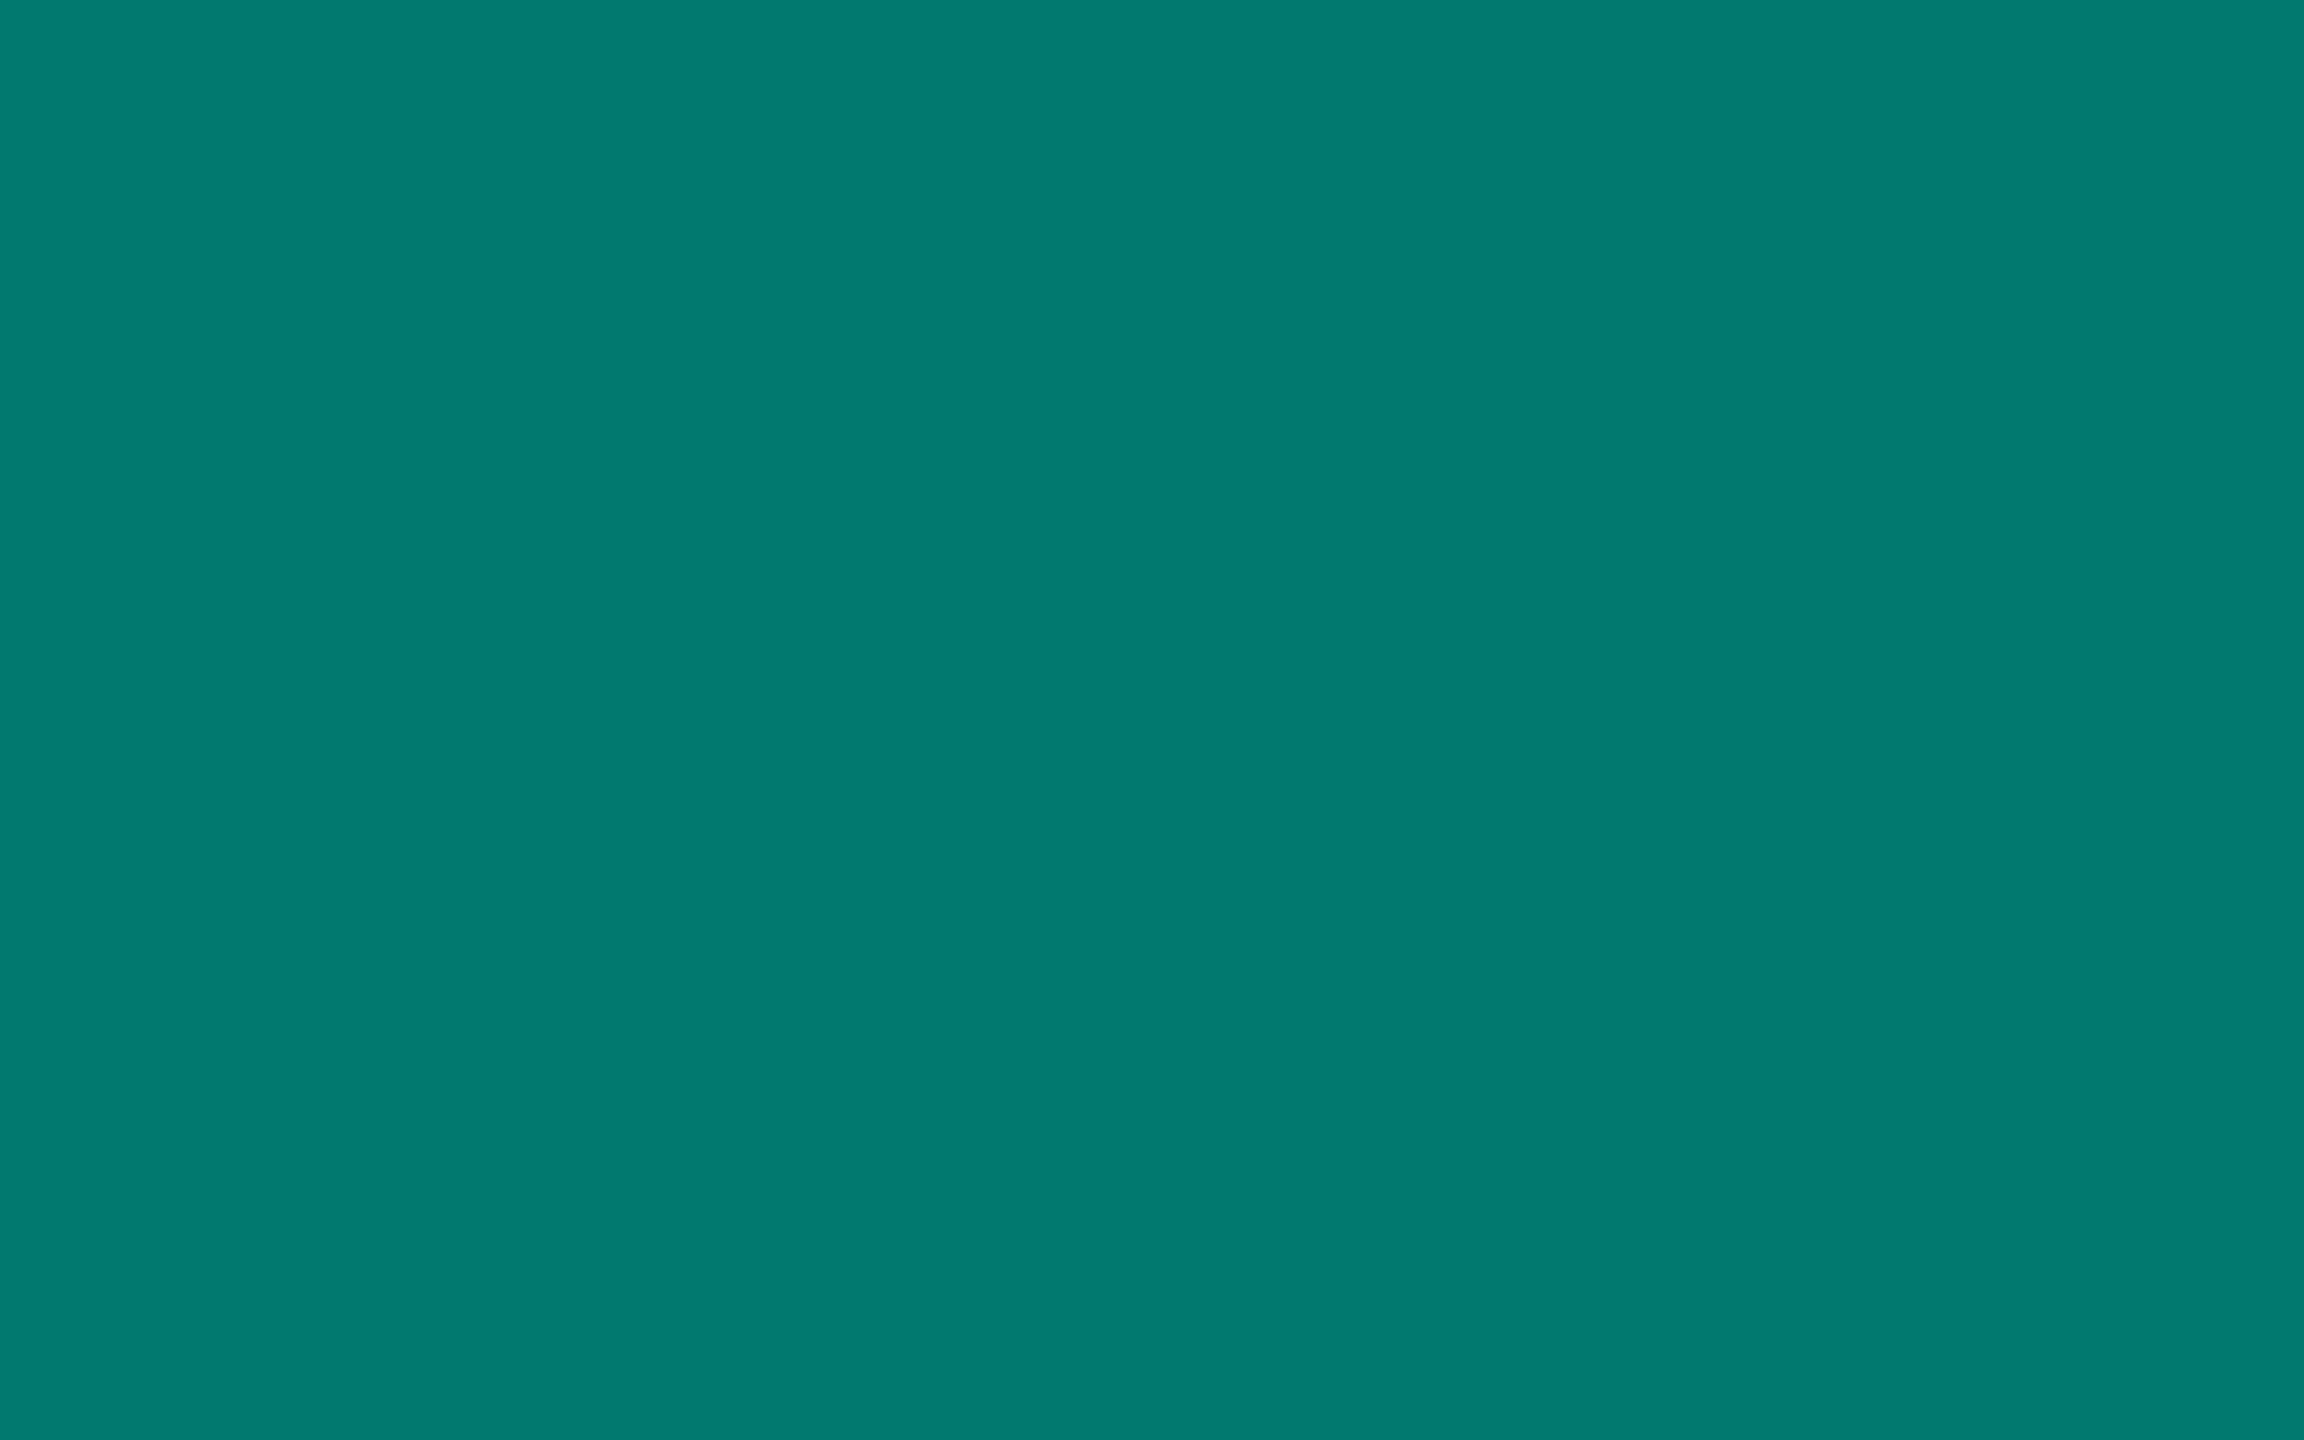 2304x1440 Pine Green Solid Color Background